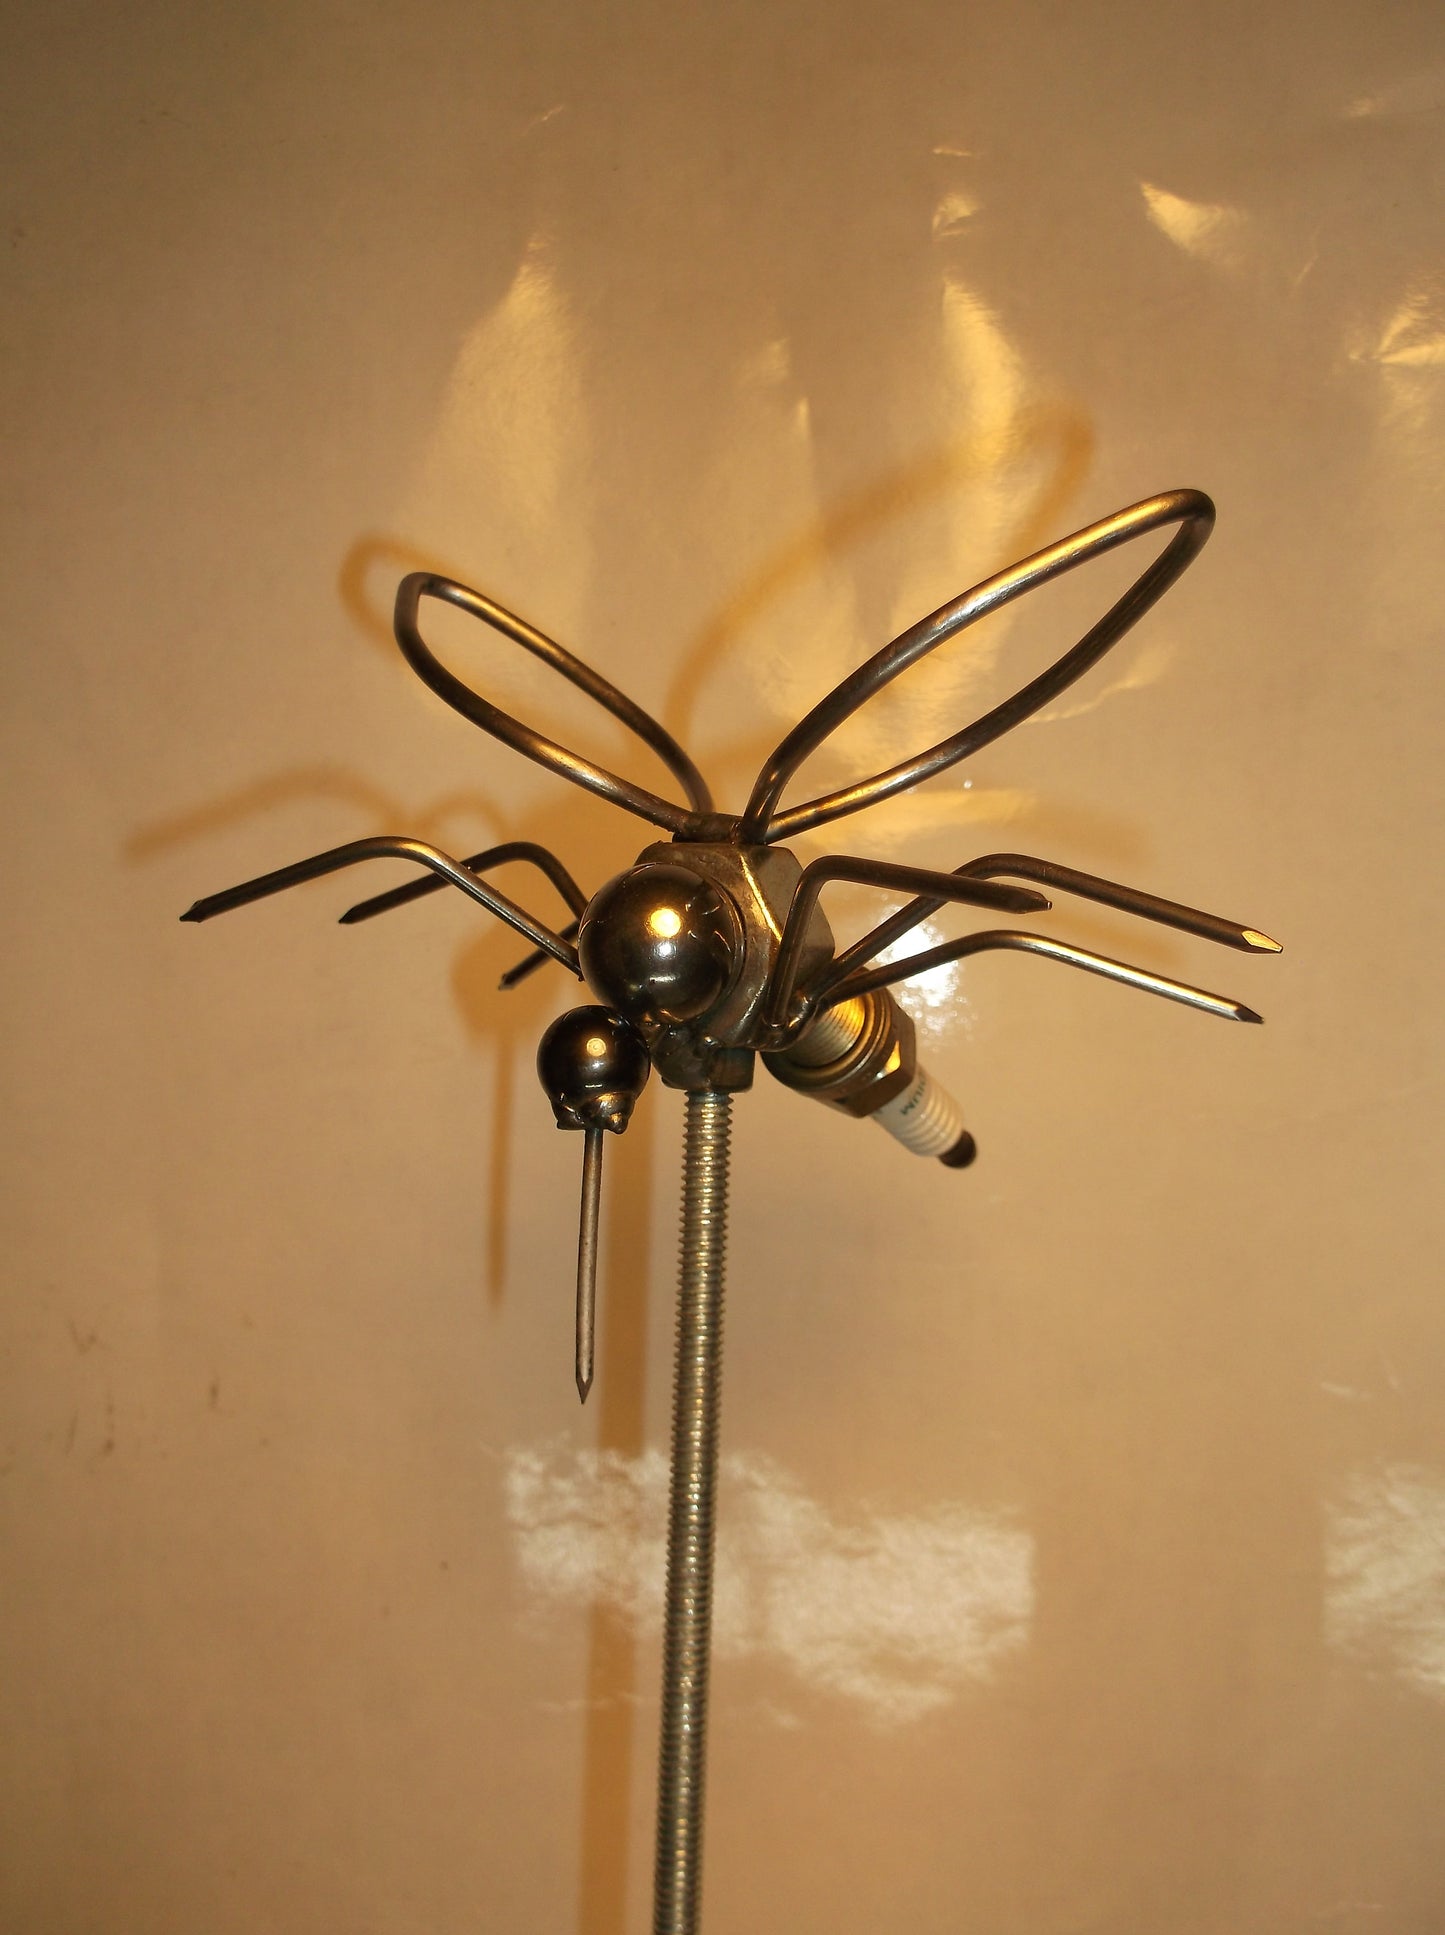 Mosquito Spark Plug Garden Stake, Metal Sculpture Insect, Up cycled yard Art